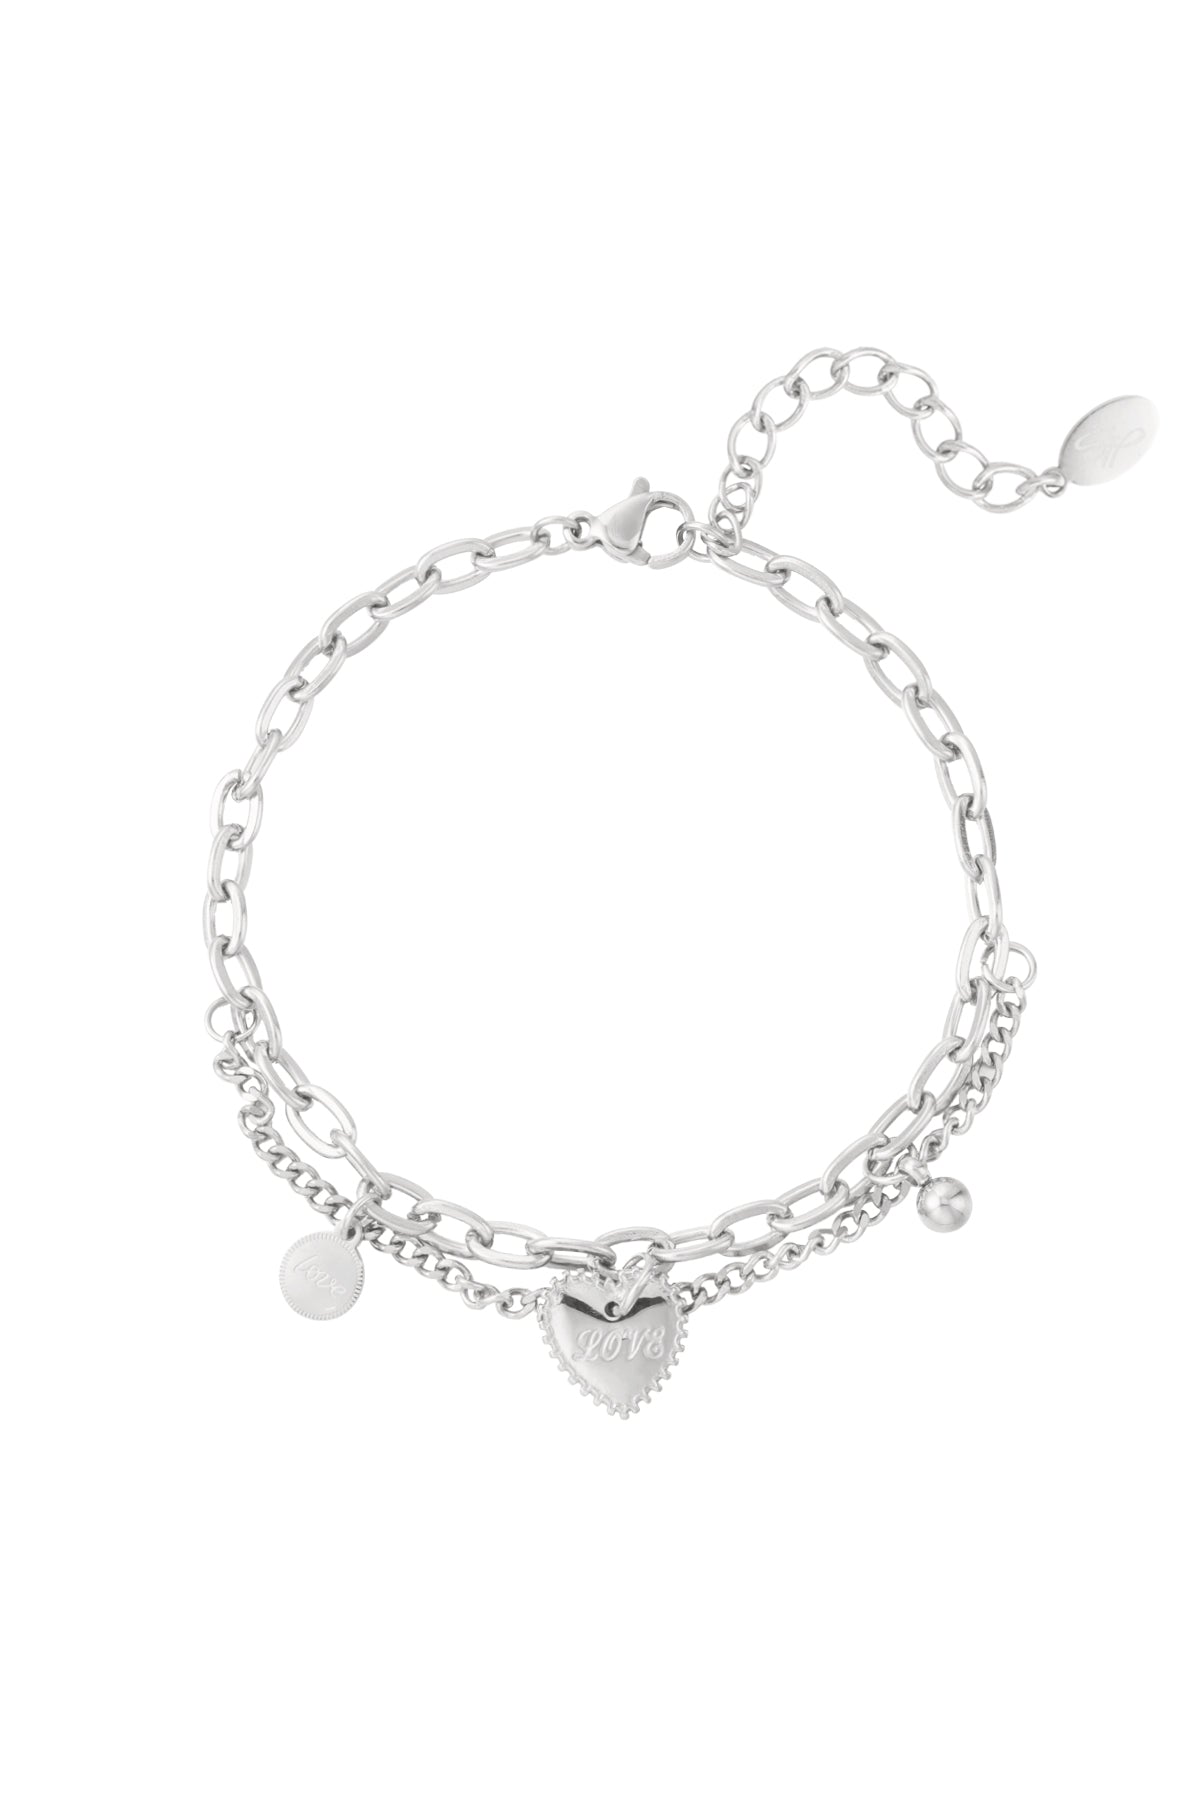 ♥︎DOUBLE LOVE CHAIN ARMBAND - My Favourites